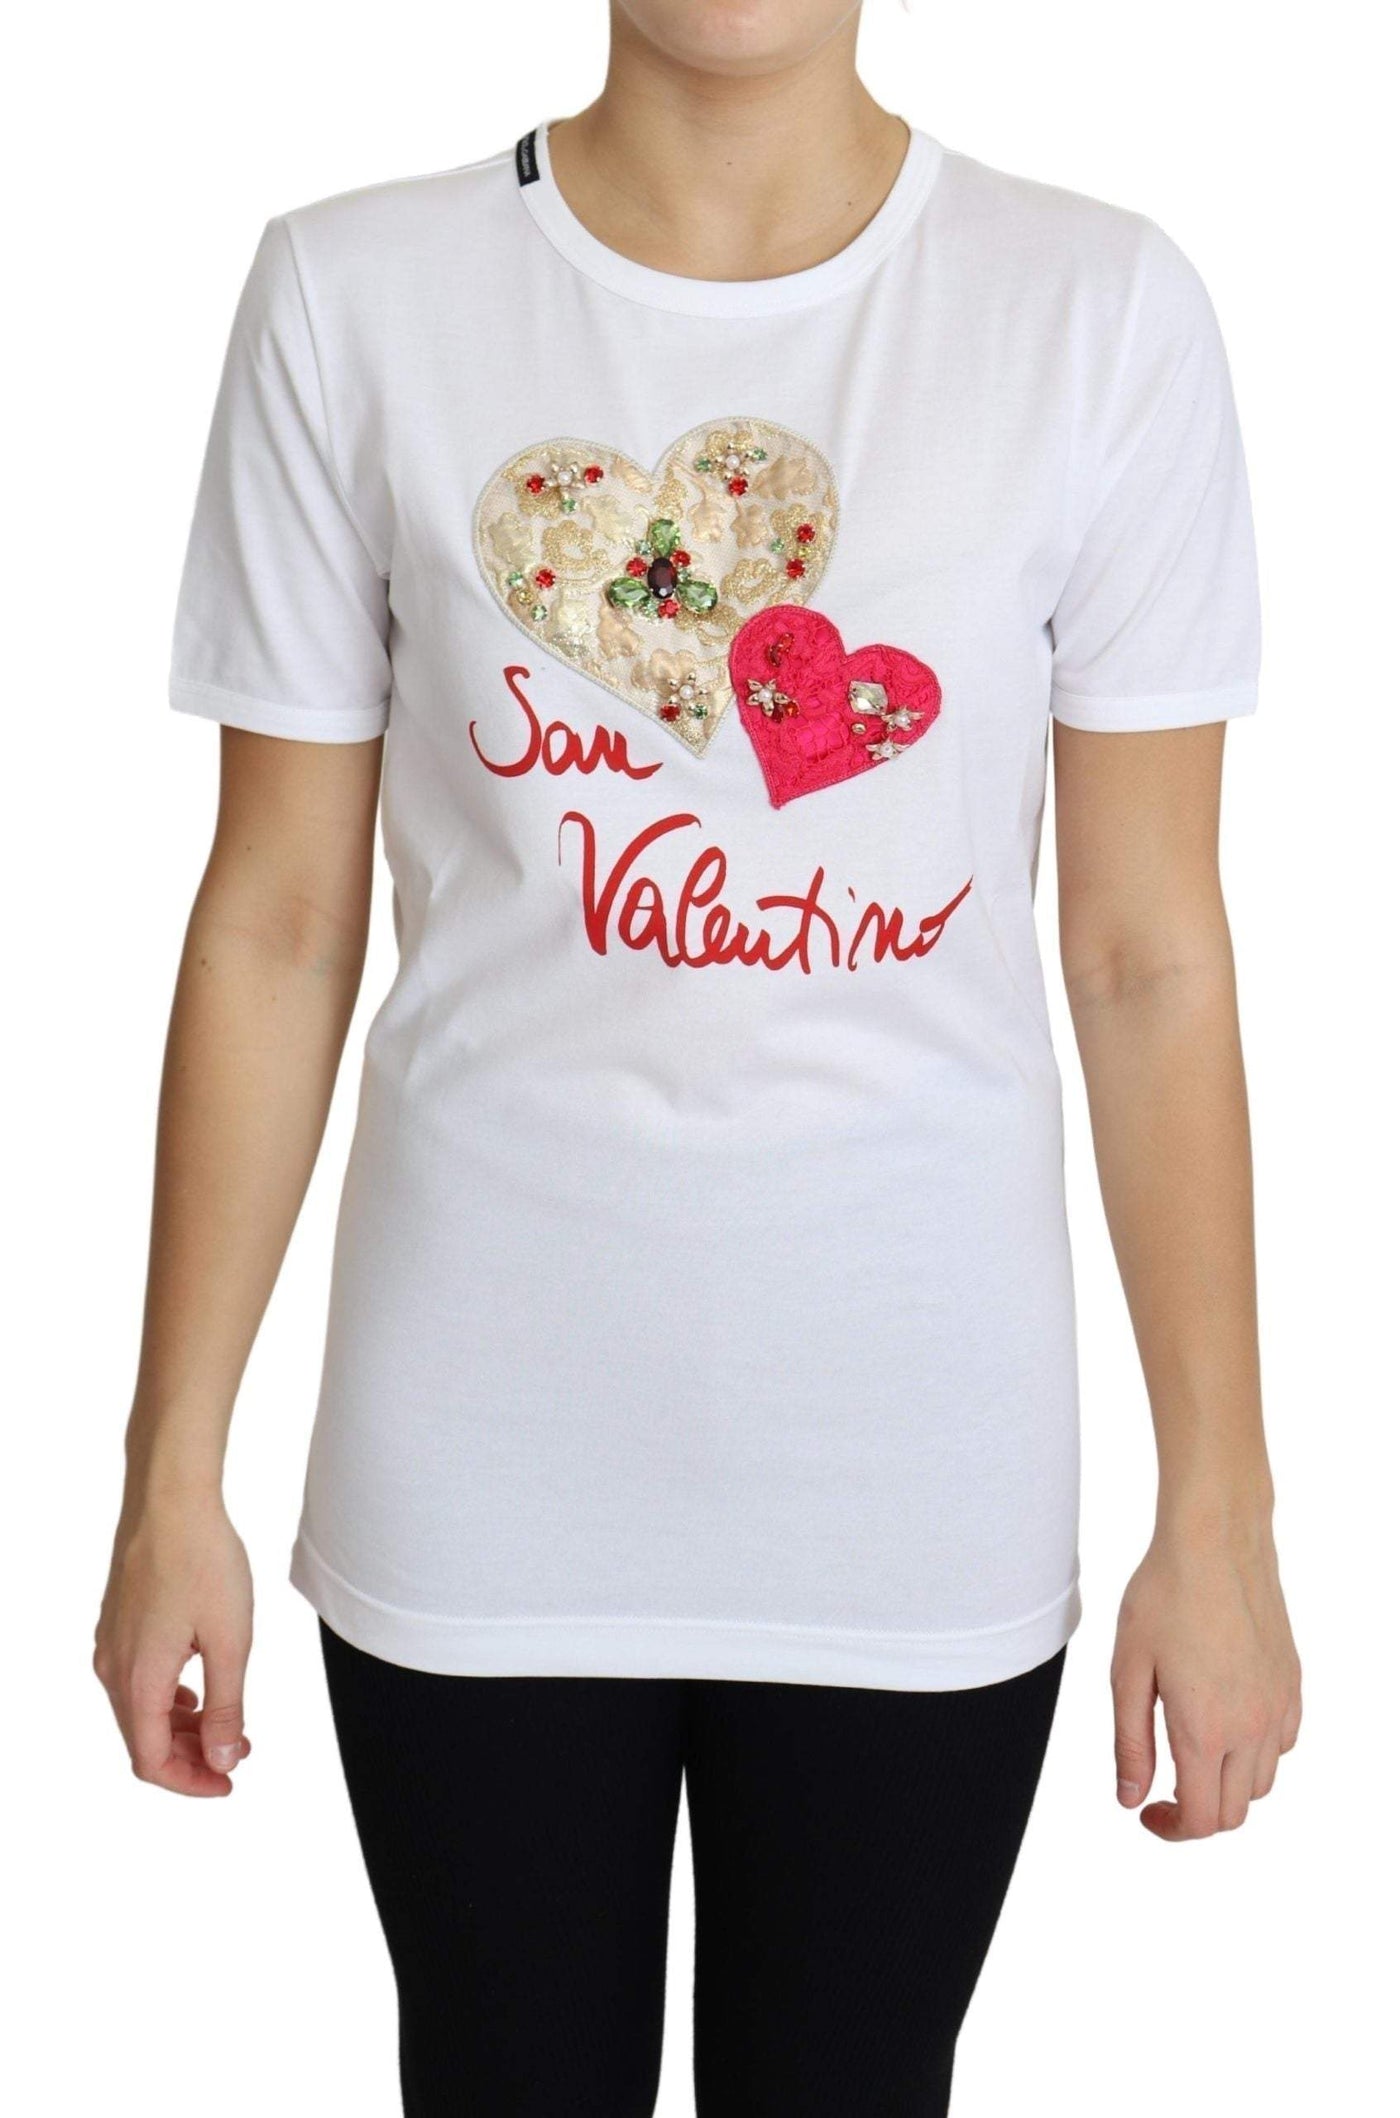 Dolce & Gabbana White San Valentino Heart Crystals T-shirt Top #women, Dolce & Gabbana, feed-agegroup-adult, feed-color-White, feed-gender-female, feed-size-IT36 | XS, IT36 | XS, Tops & T-Shirts - Women - Clothing, White, Women - New Arrivals at SEYMAYKA